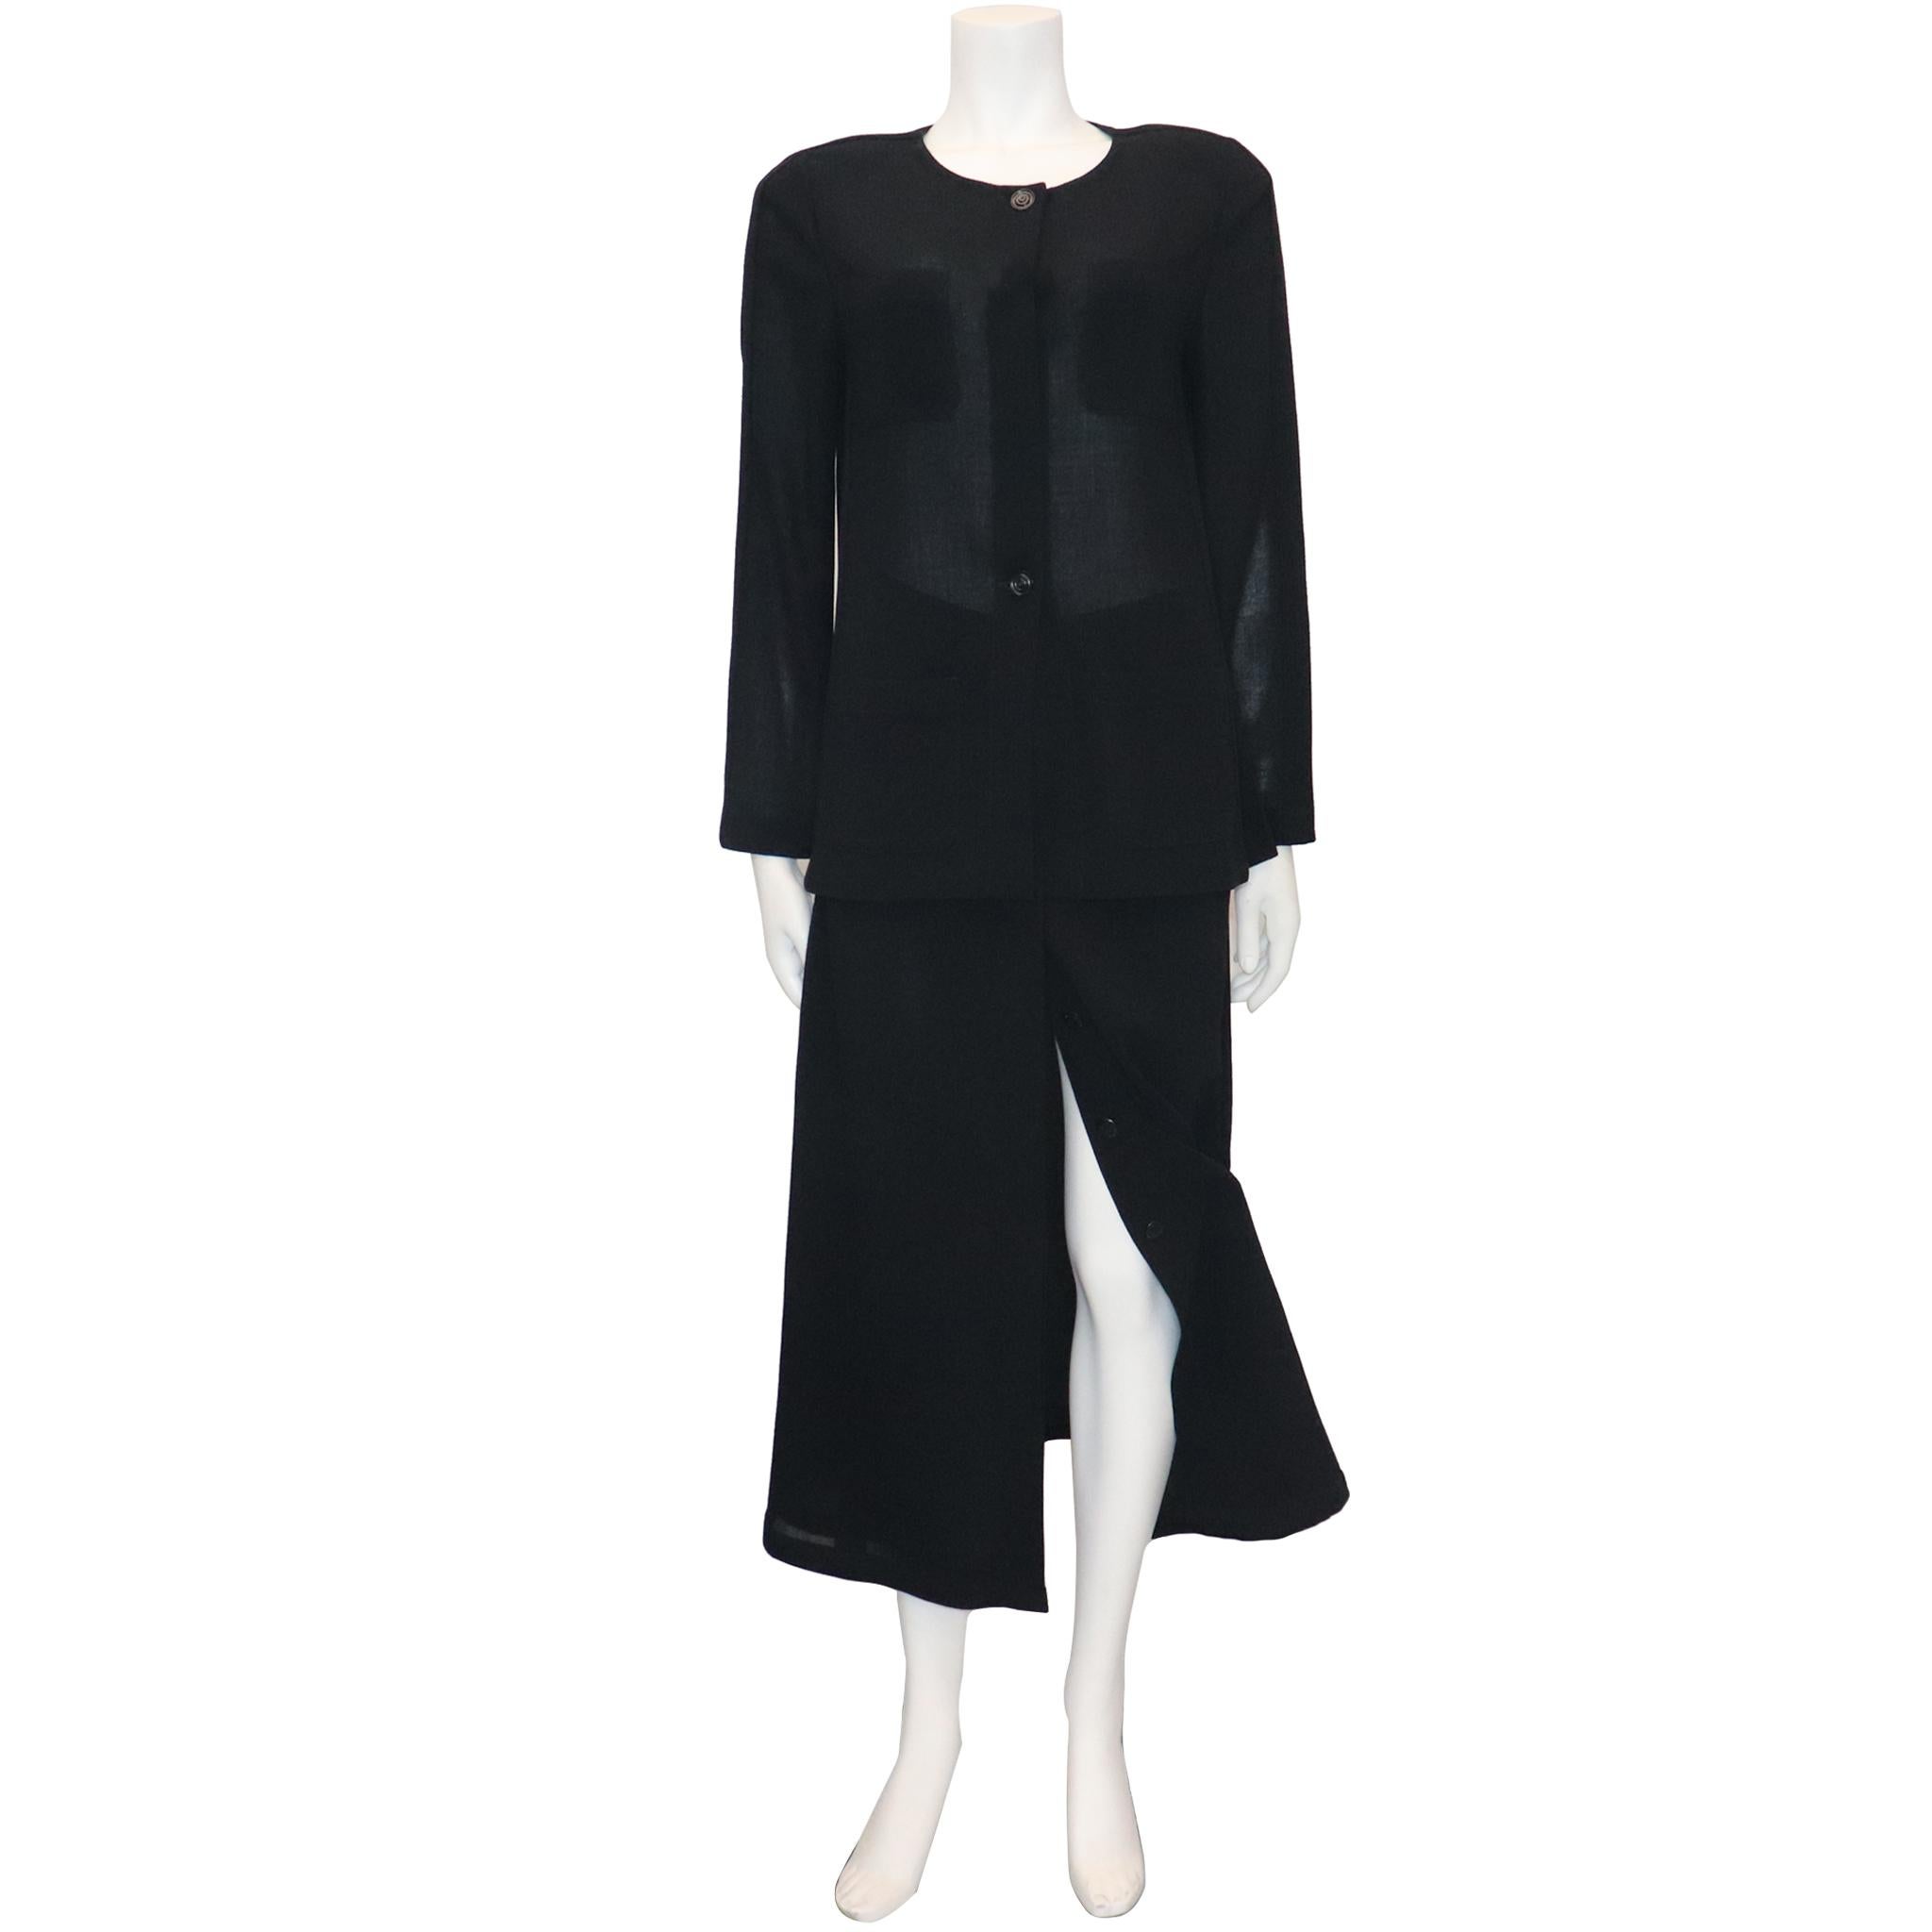 Chanel Black Wool Jacket w/ 4 Pockets & Button Down Skirt 2PC Circa 1990s Spring. New with tags. 

Measurements- 

Jacket Size: 40
Skirt Size: 38
Skirt Length: 34 Inches